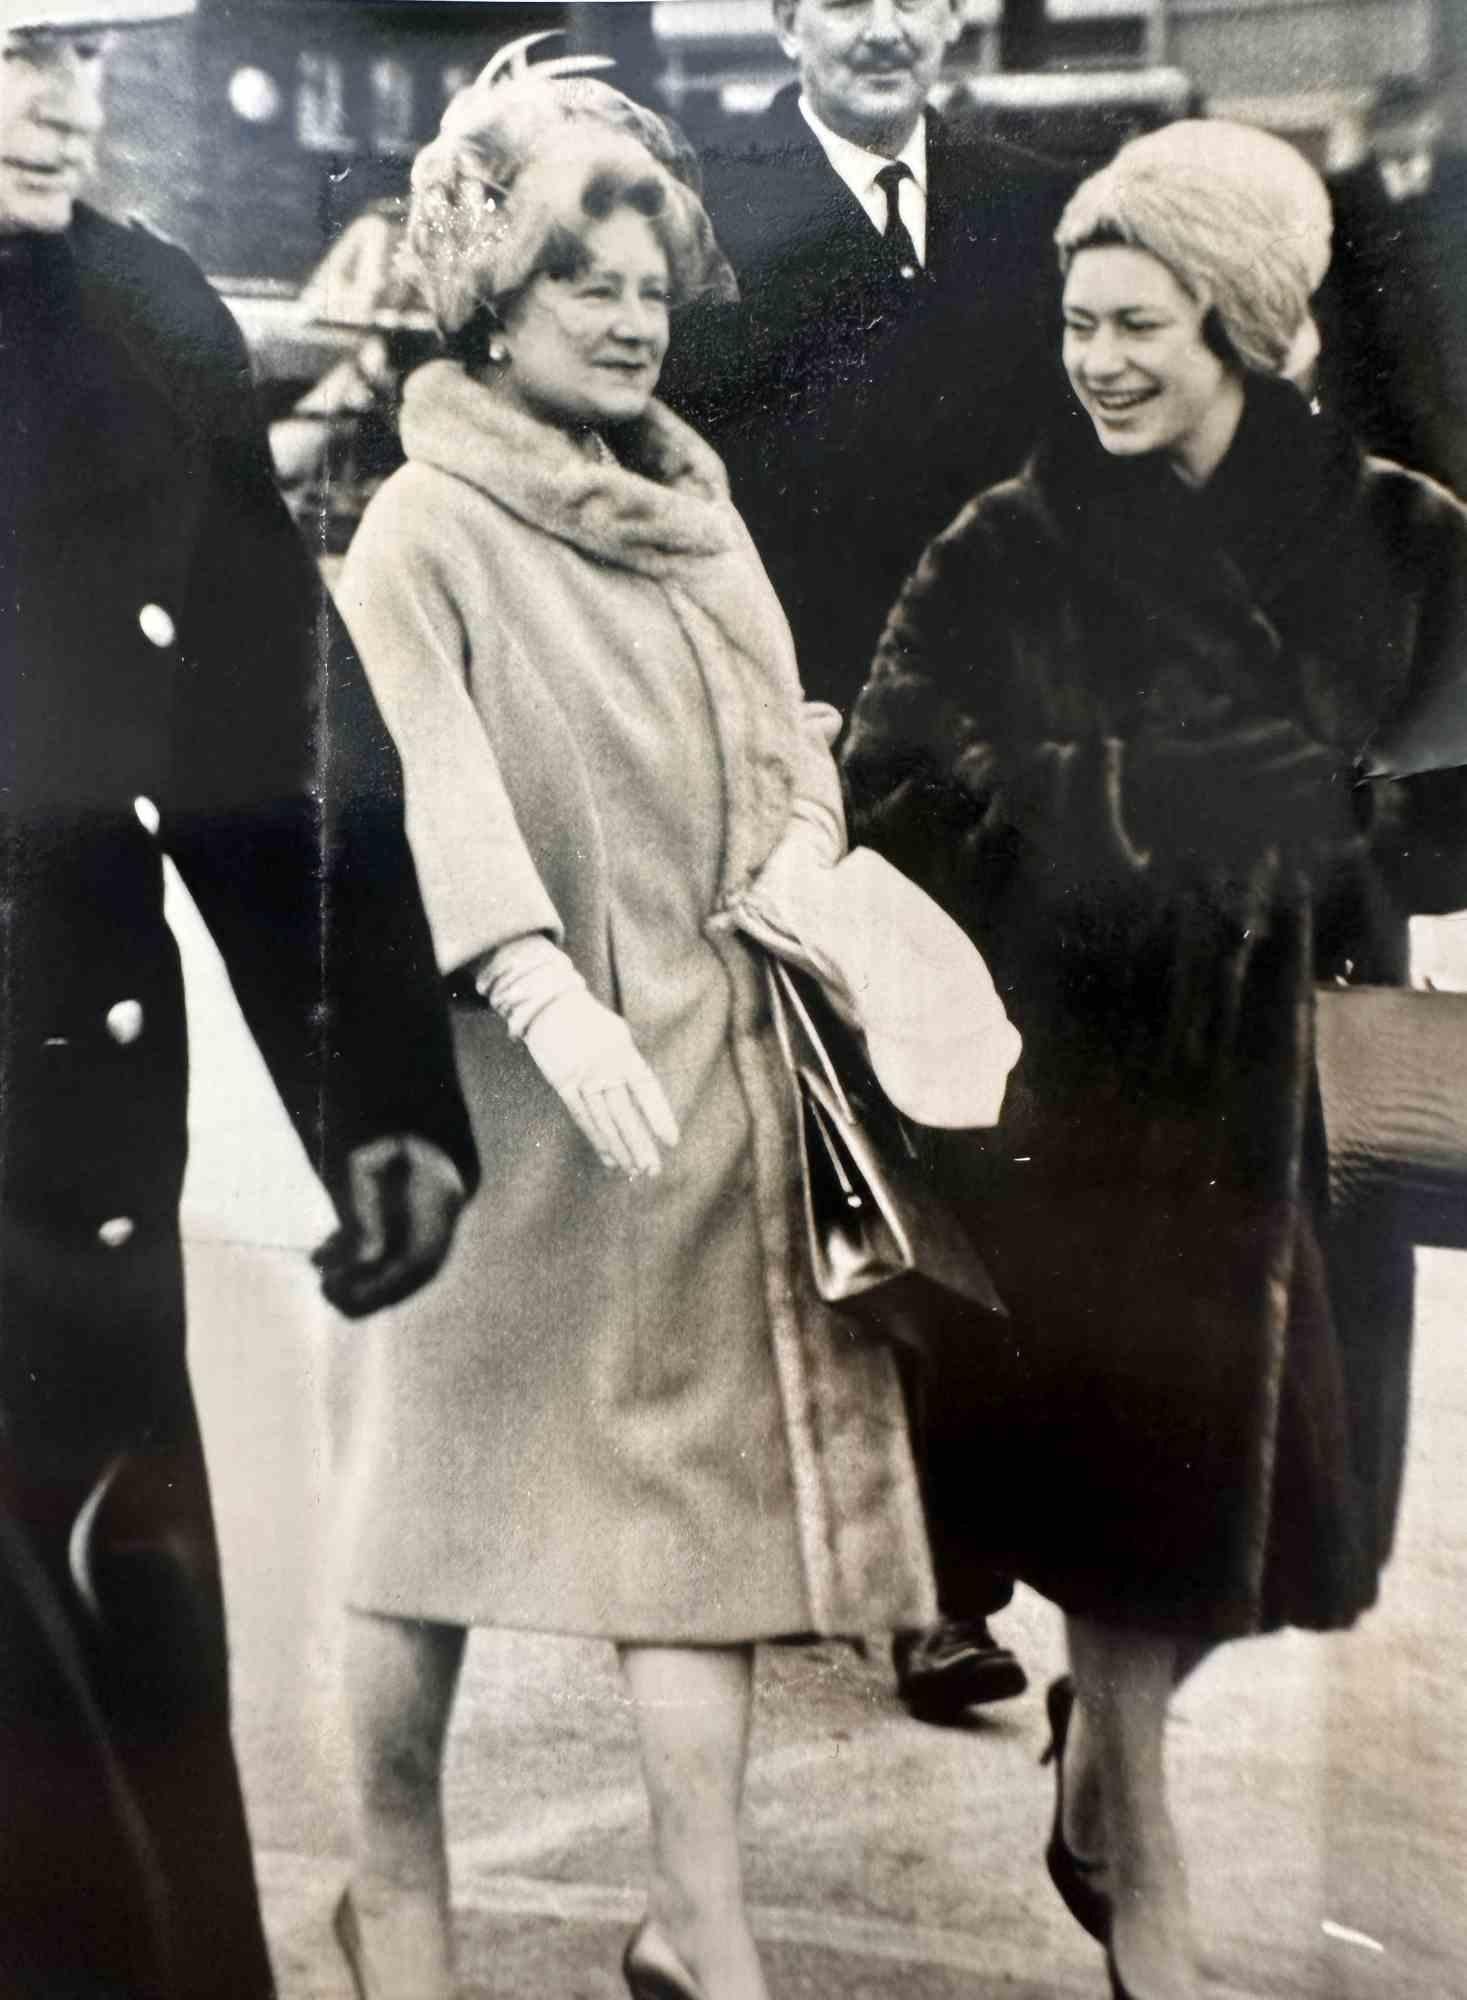 Unknown Figurative Photograph - Queen Elizabeth and her Mother - Vintage Photo - 1950s